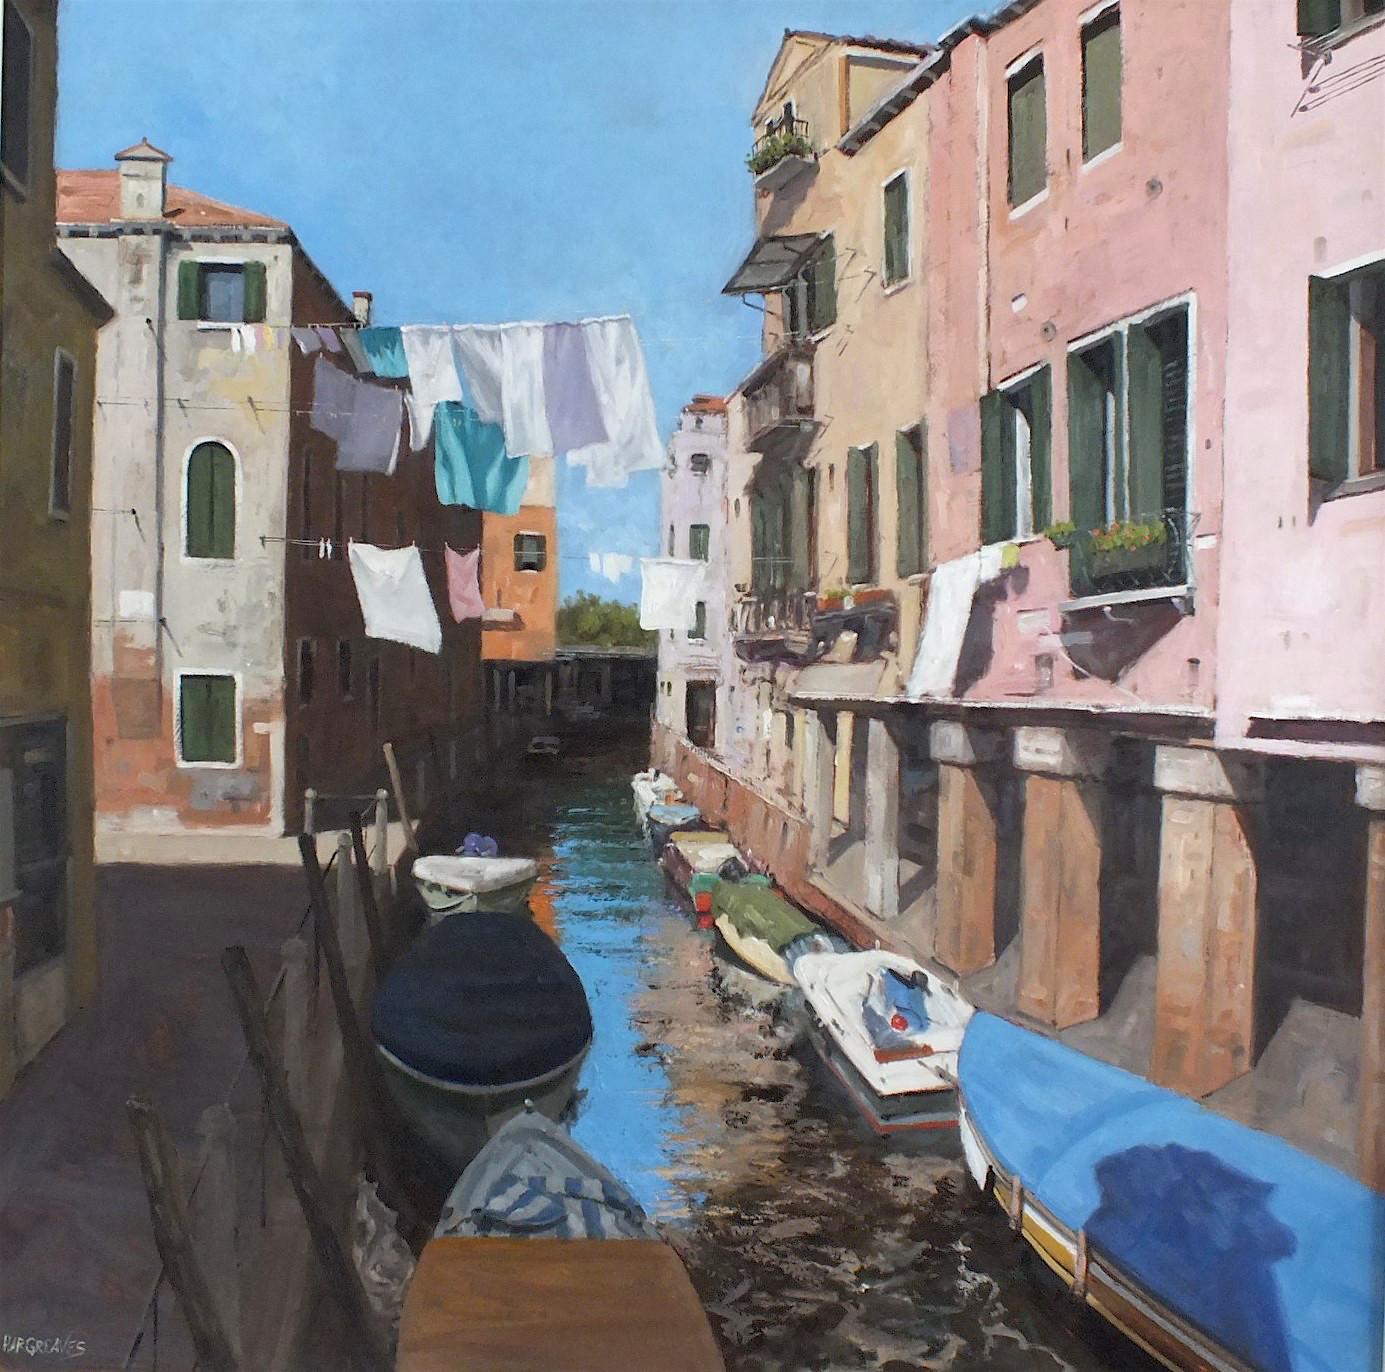 Ian Hargreaves Landscape Painting - Away from tourists Original Venice landscape painting Contemporary Art 